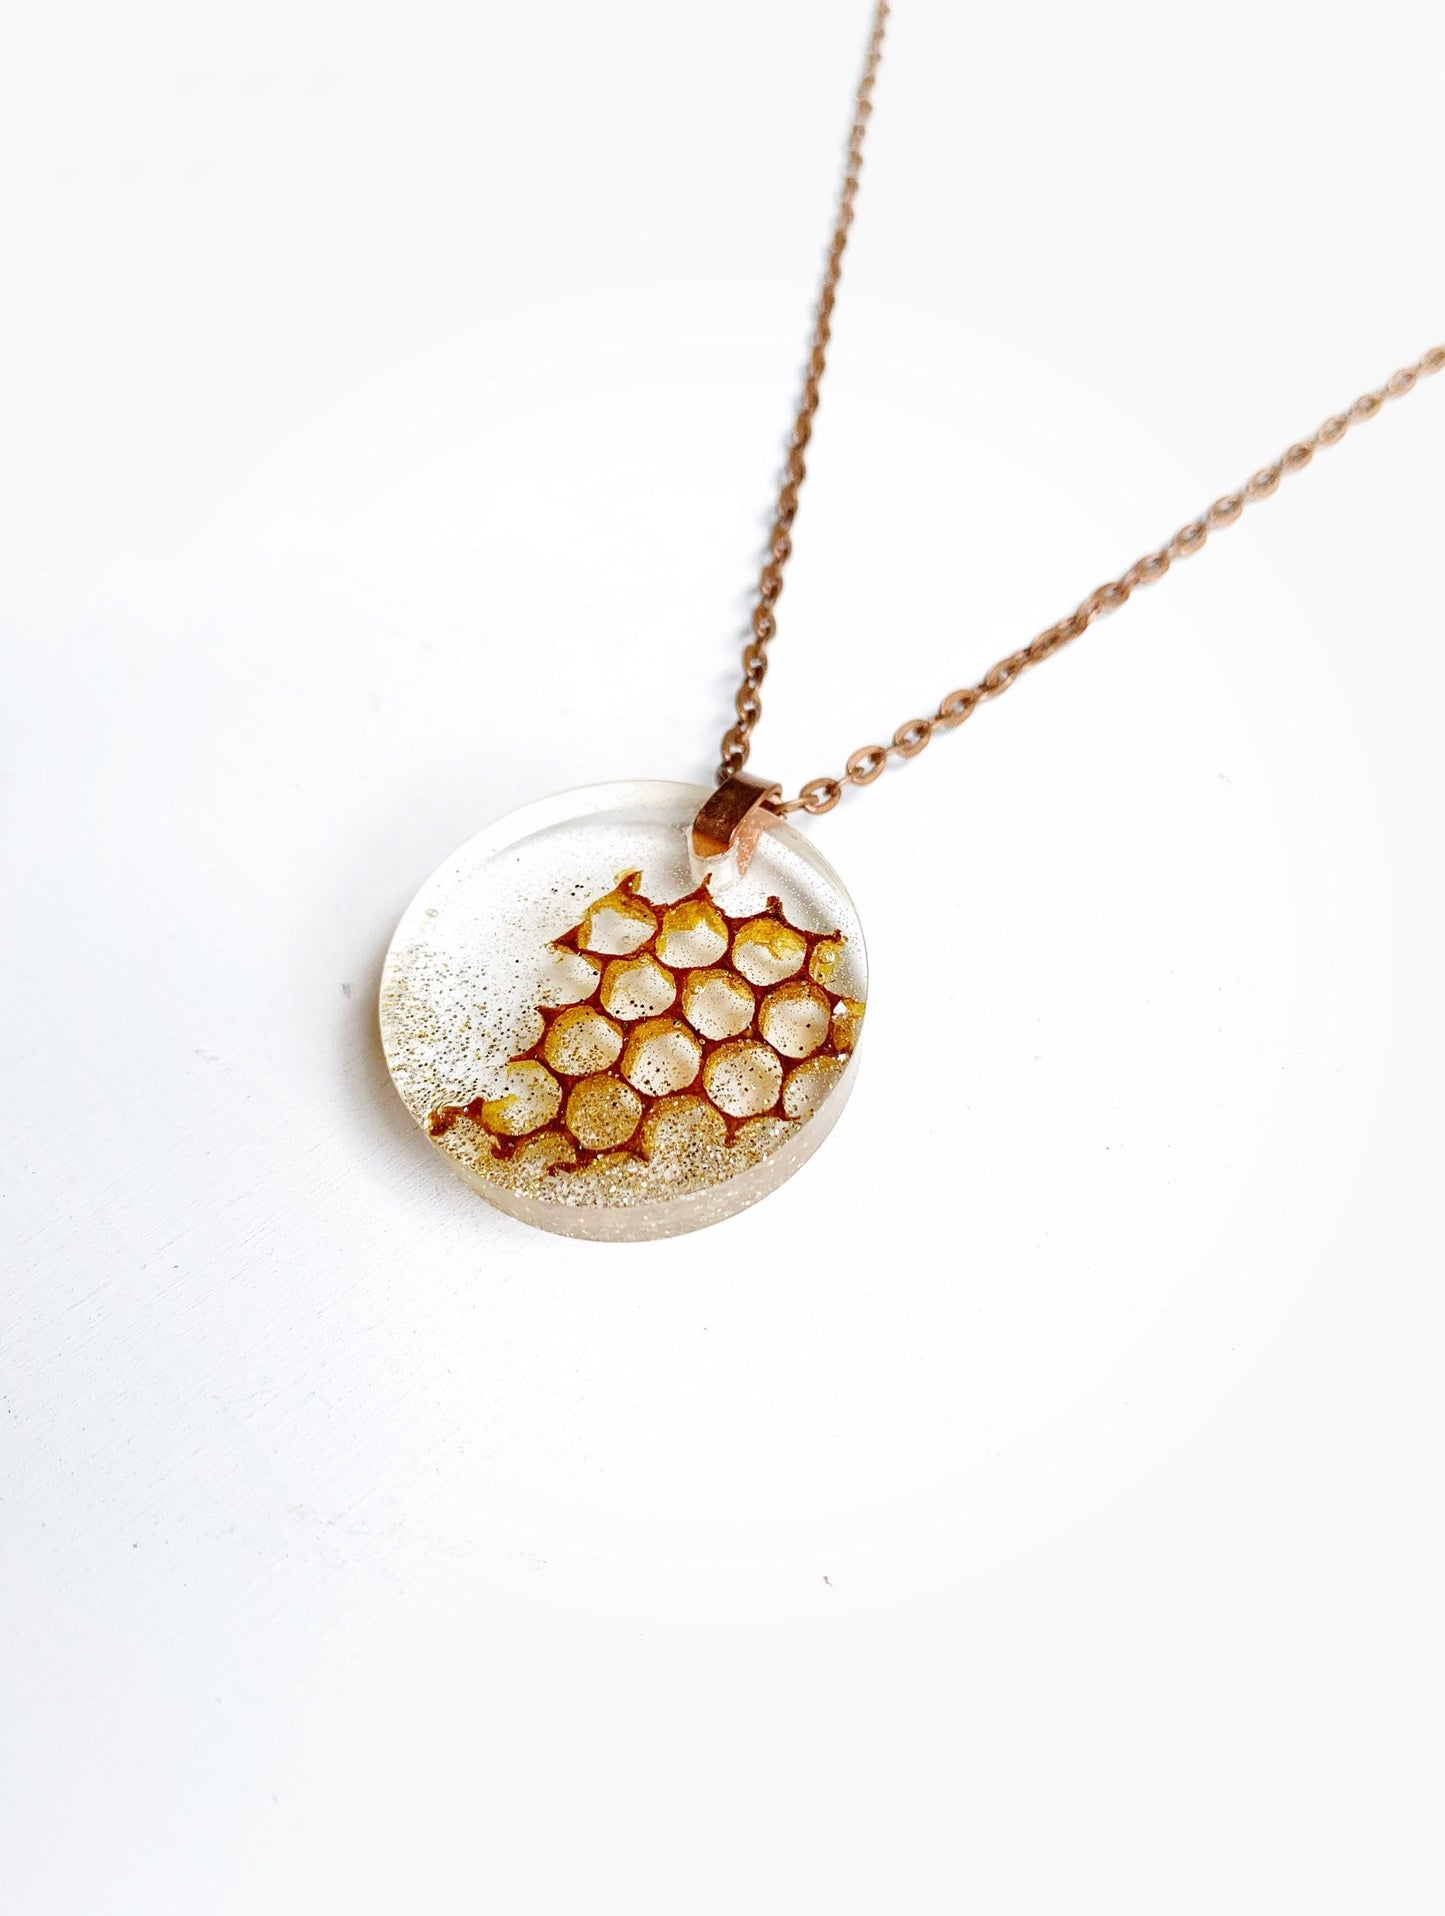 Customizable || Unique Real Pressed Honeycomb Necklace (Myakka’s Gold Apiary) Florida Resin Nature Jewelry